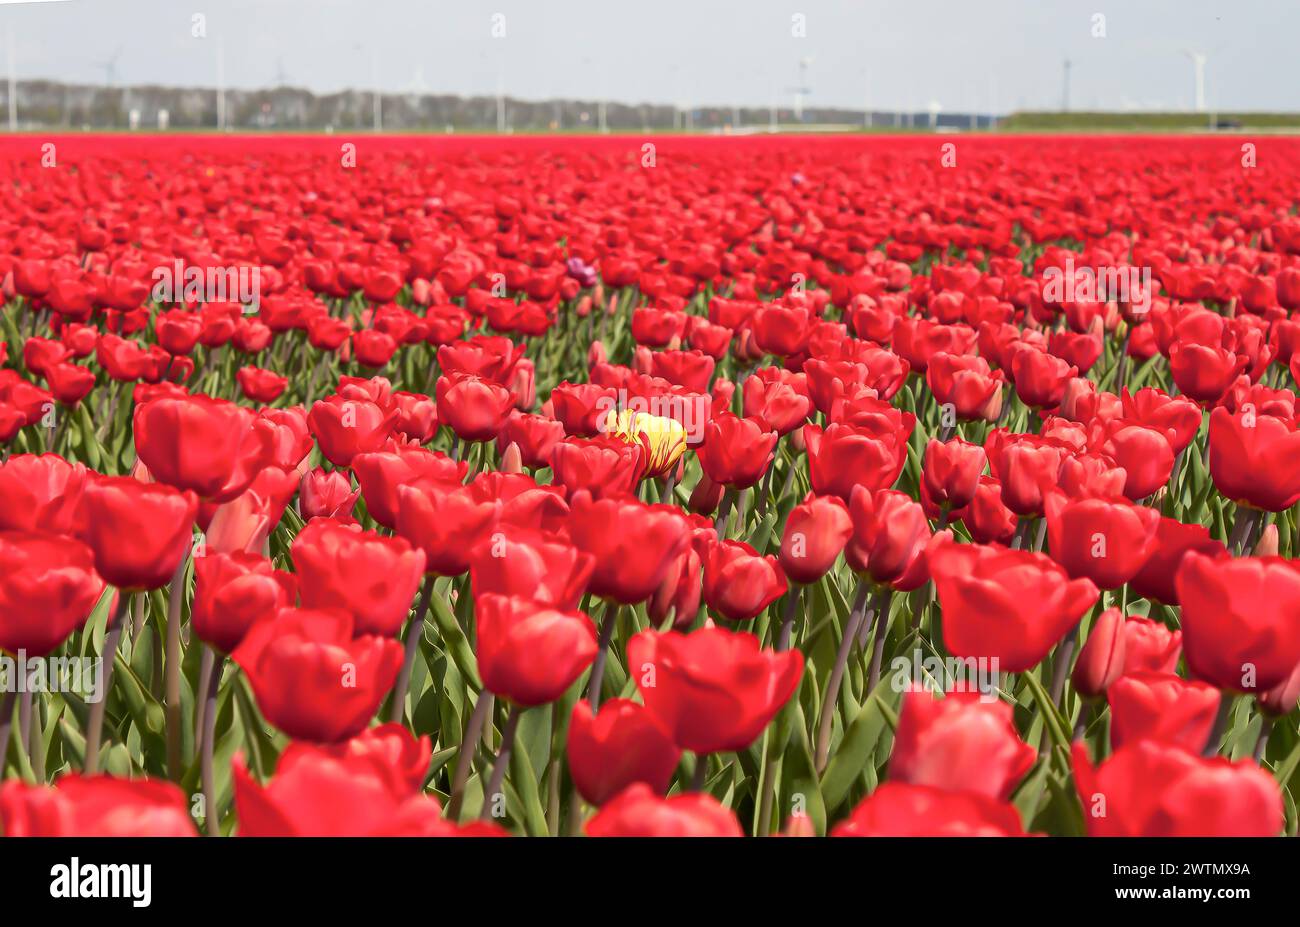 Colorful tulip flowers. One yellow tulip among red ones in a spring field. Stock Photo